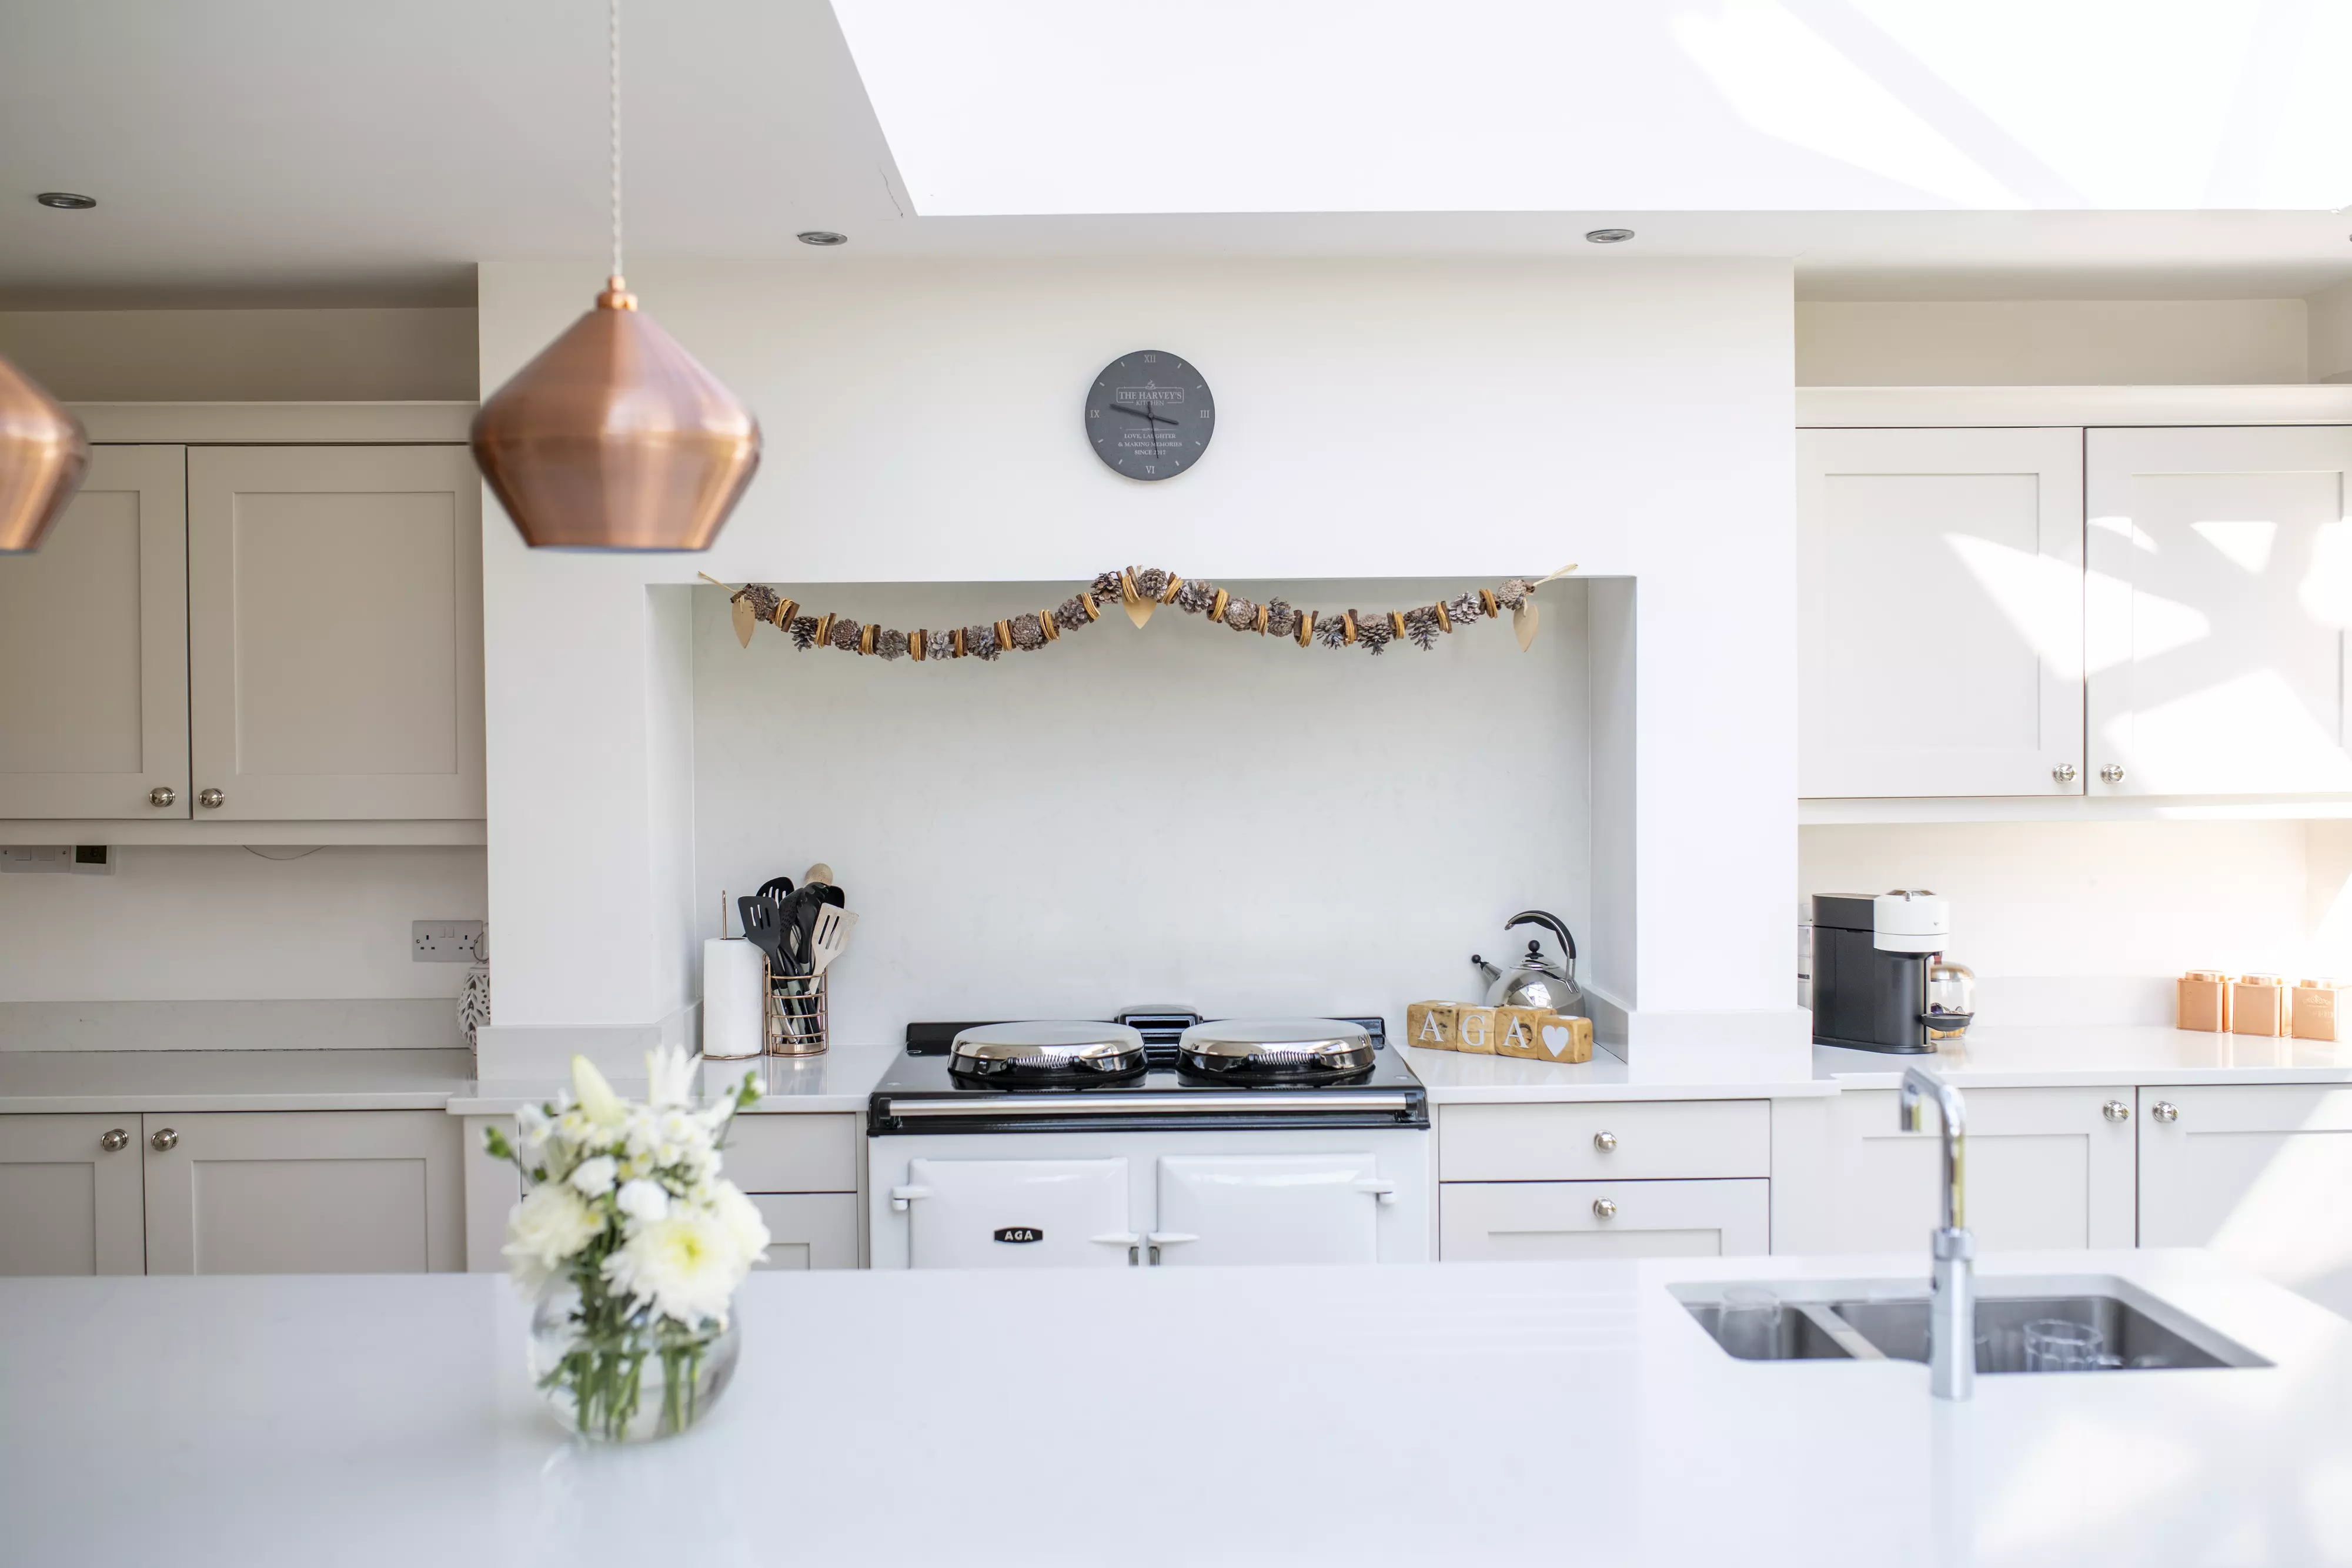 Bright modern kitchen with white cabinets, copper lights, and AGA cooker.